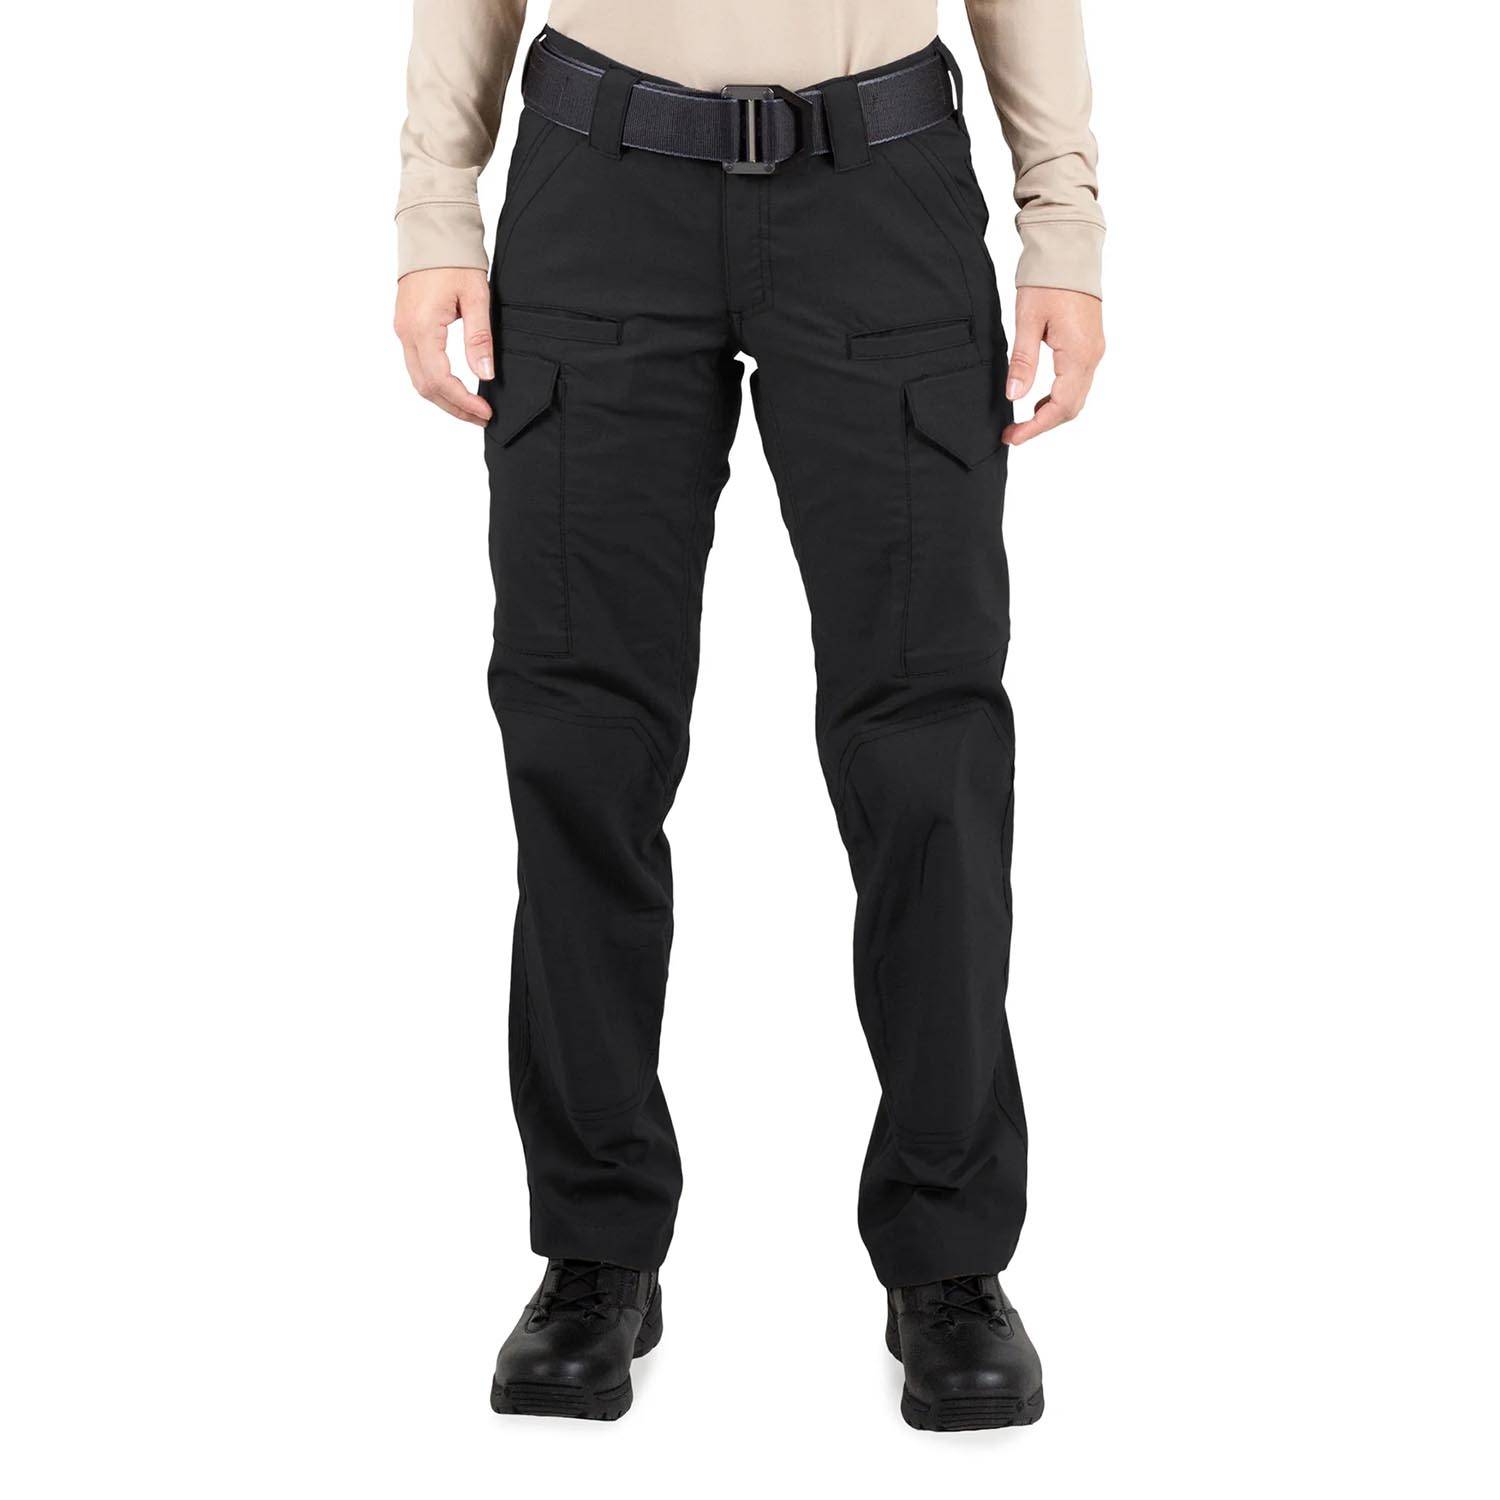 FIRST TACTICAL WOMEN'S V2 TACTICAL PANTS